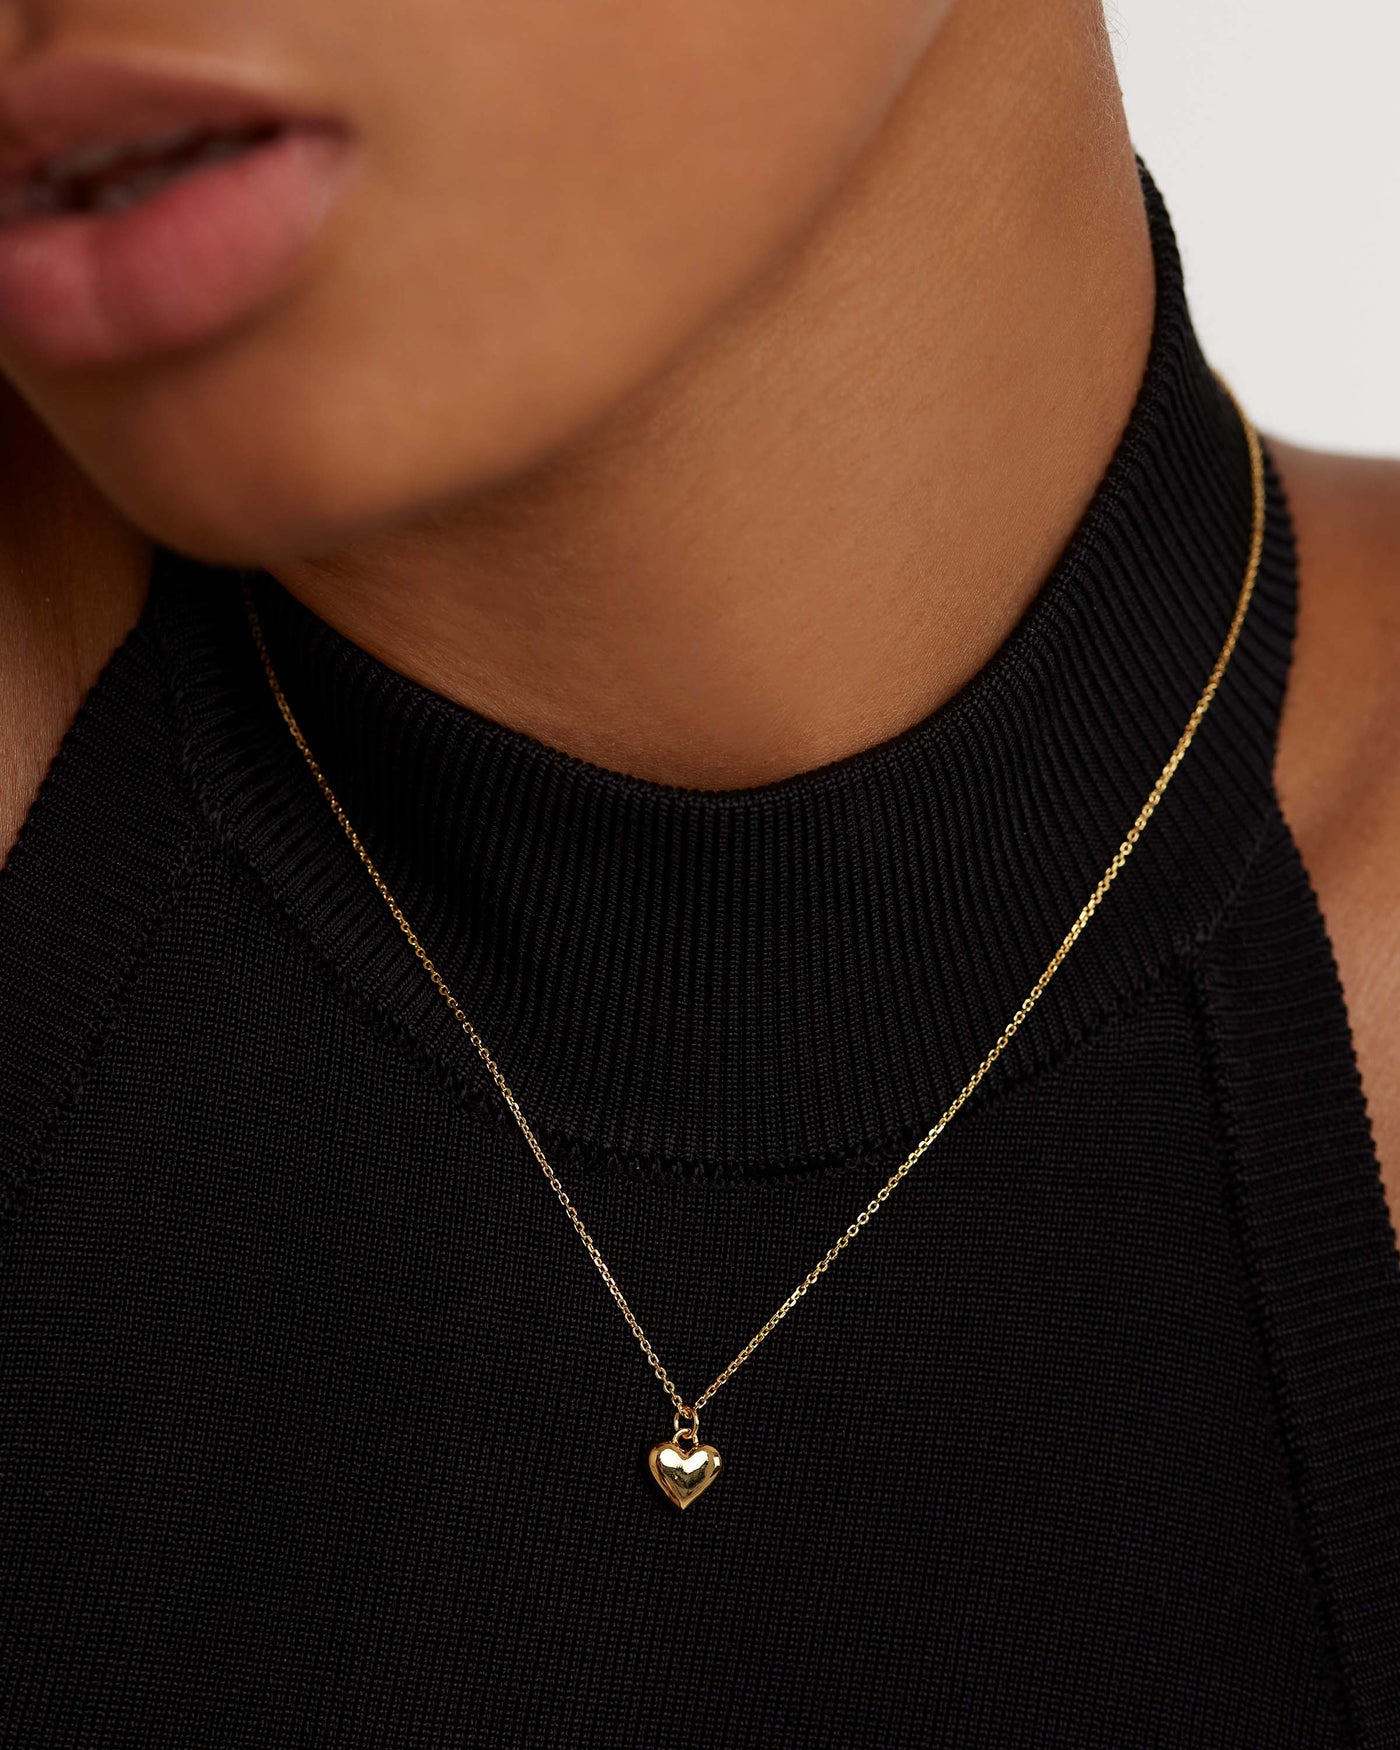 L'Absolu Gold Necklace - 925 sterling silver / 18K gold plating